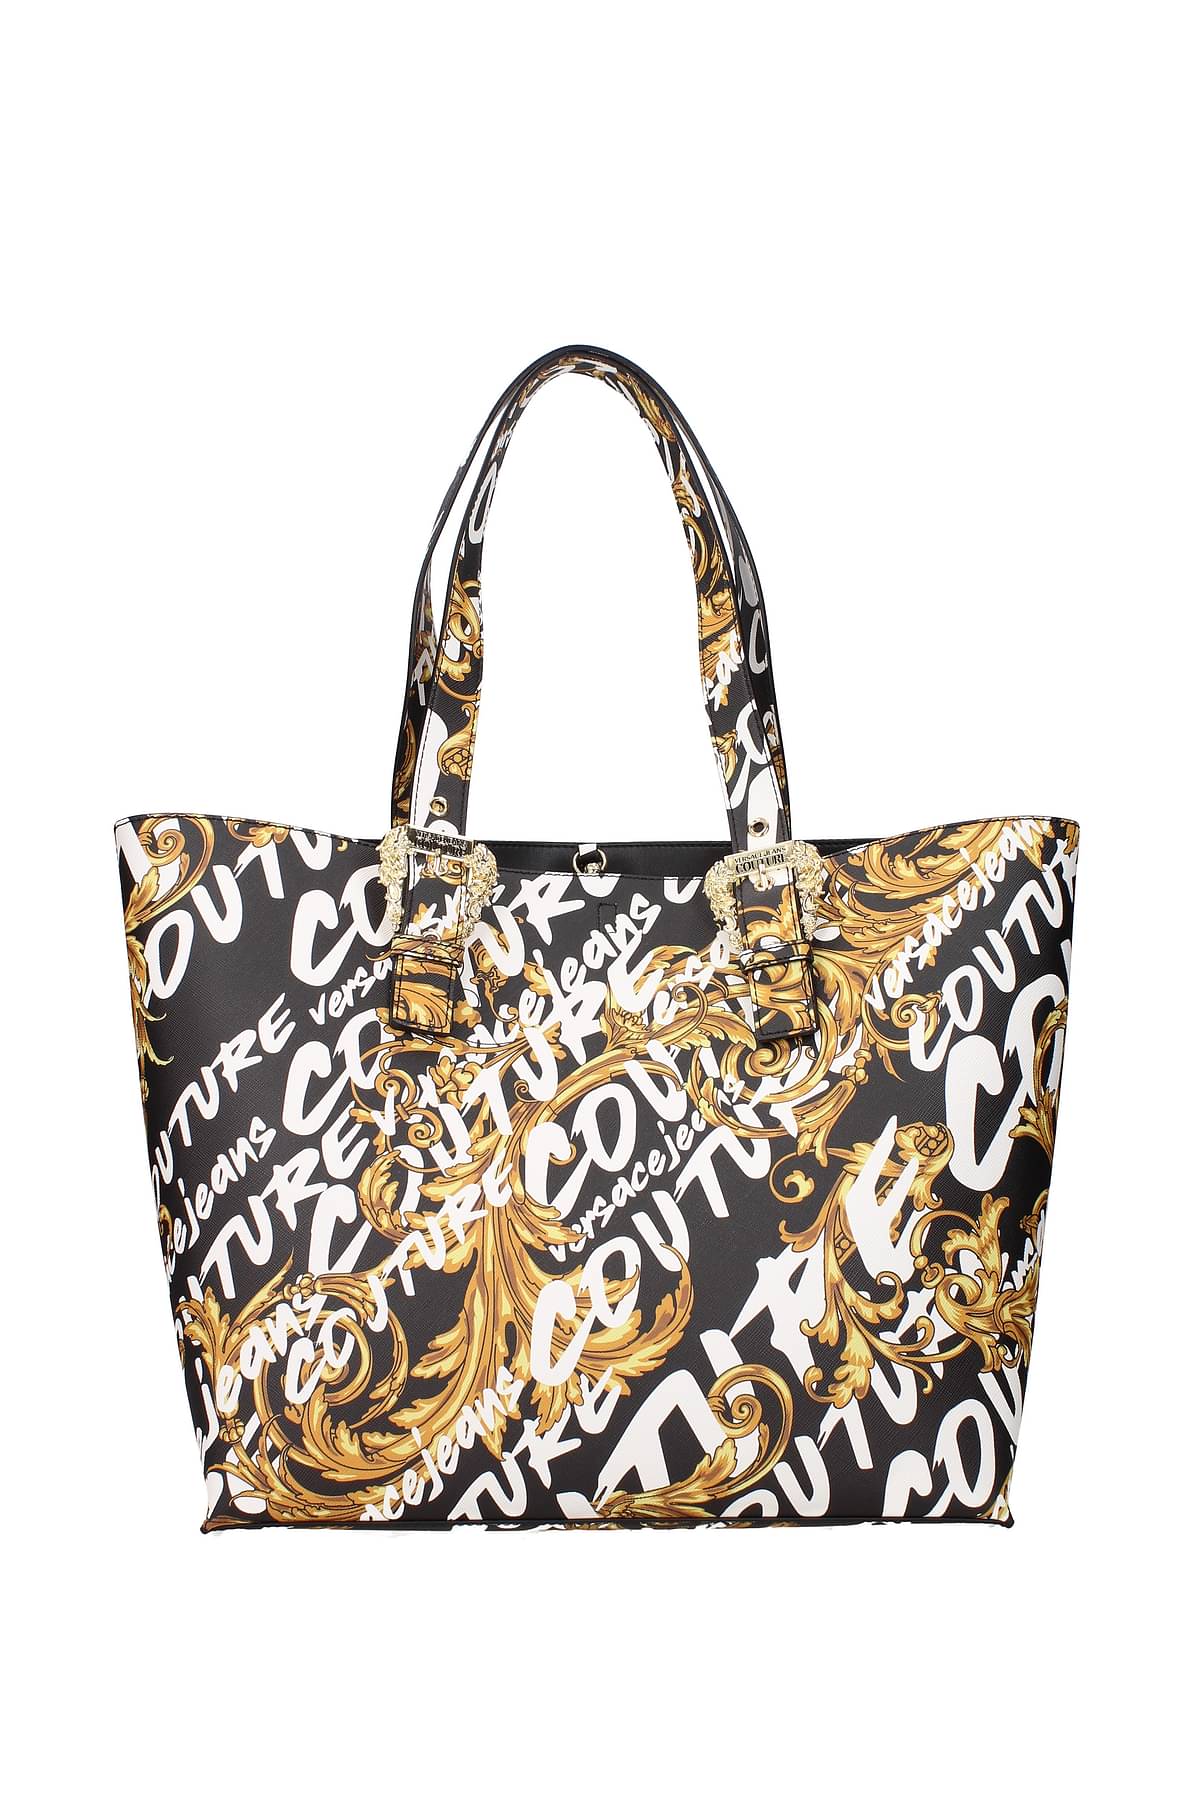 Versace Collection, Bags, Tote Bag